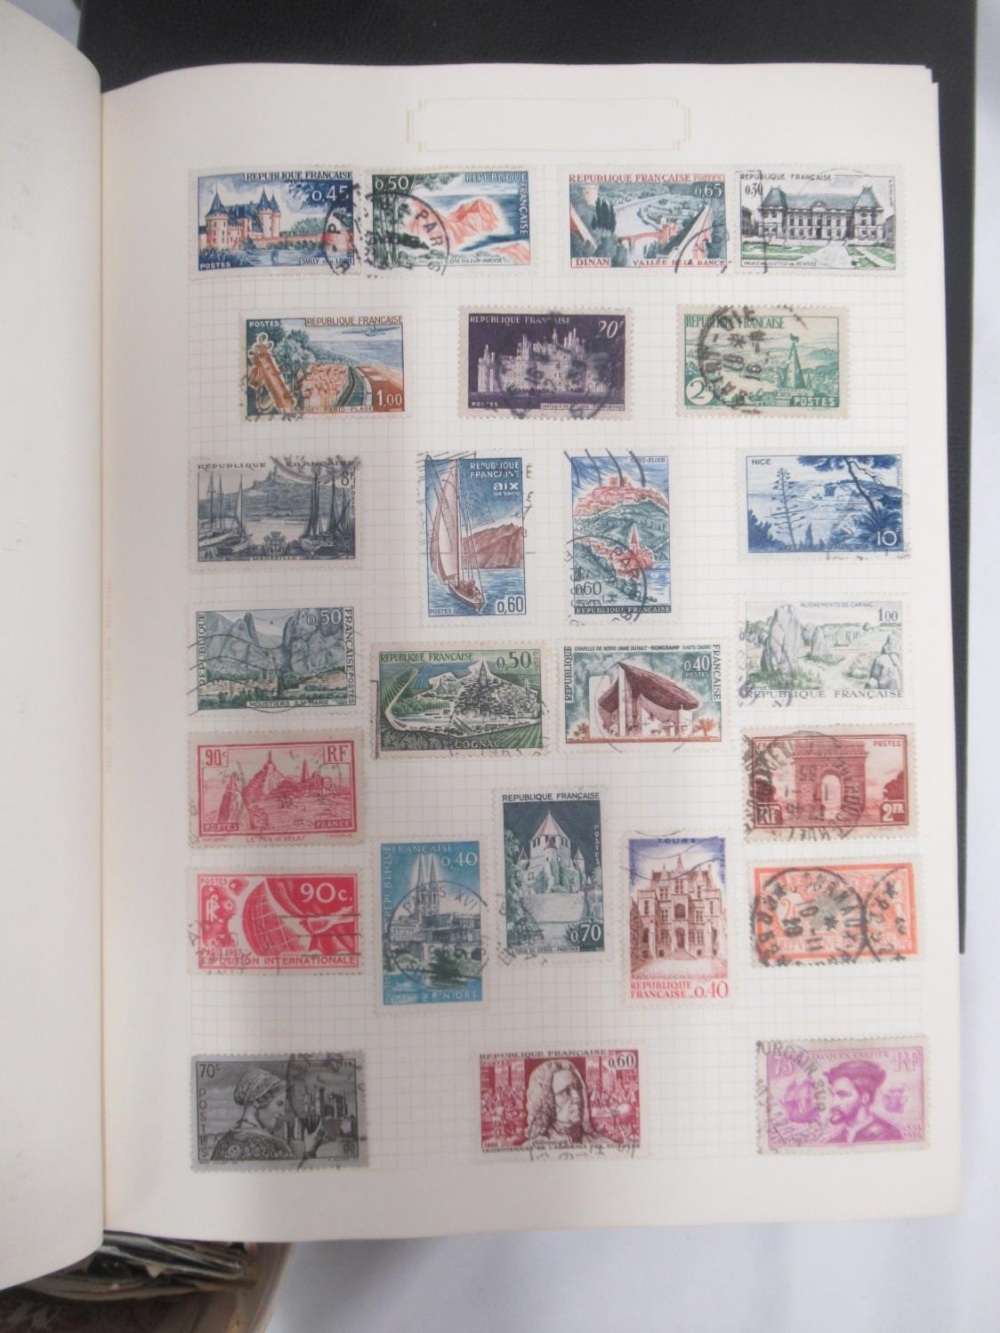 Red The Derwent Stamp Album cont. 4 used penny reds, GB & mixed International stamps, blue The - Image 8 of 11